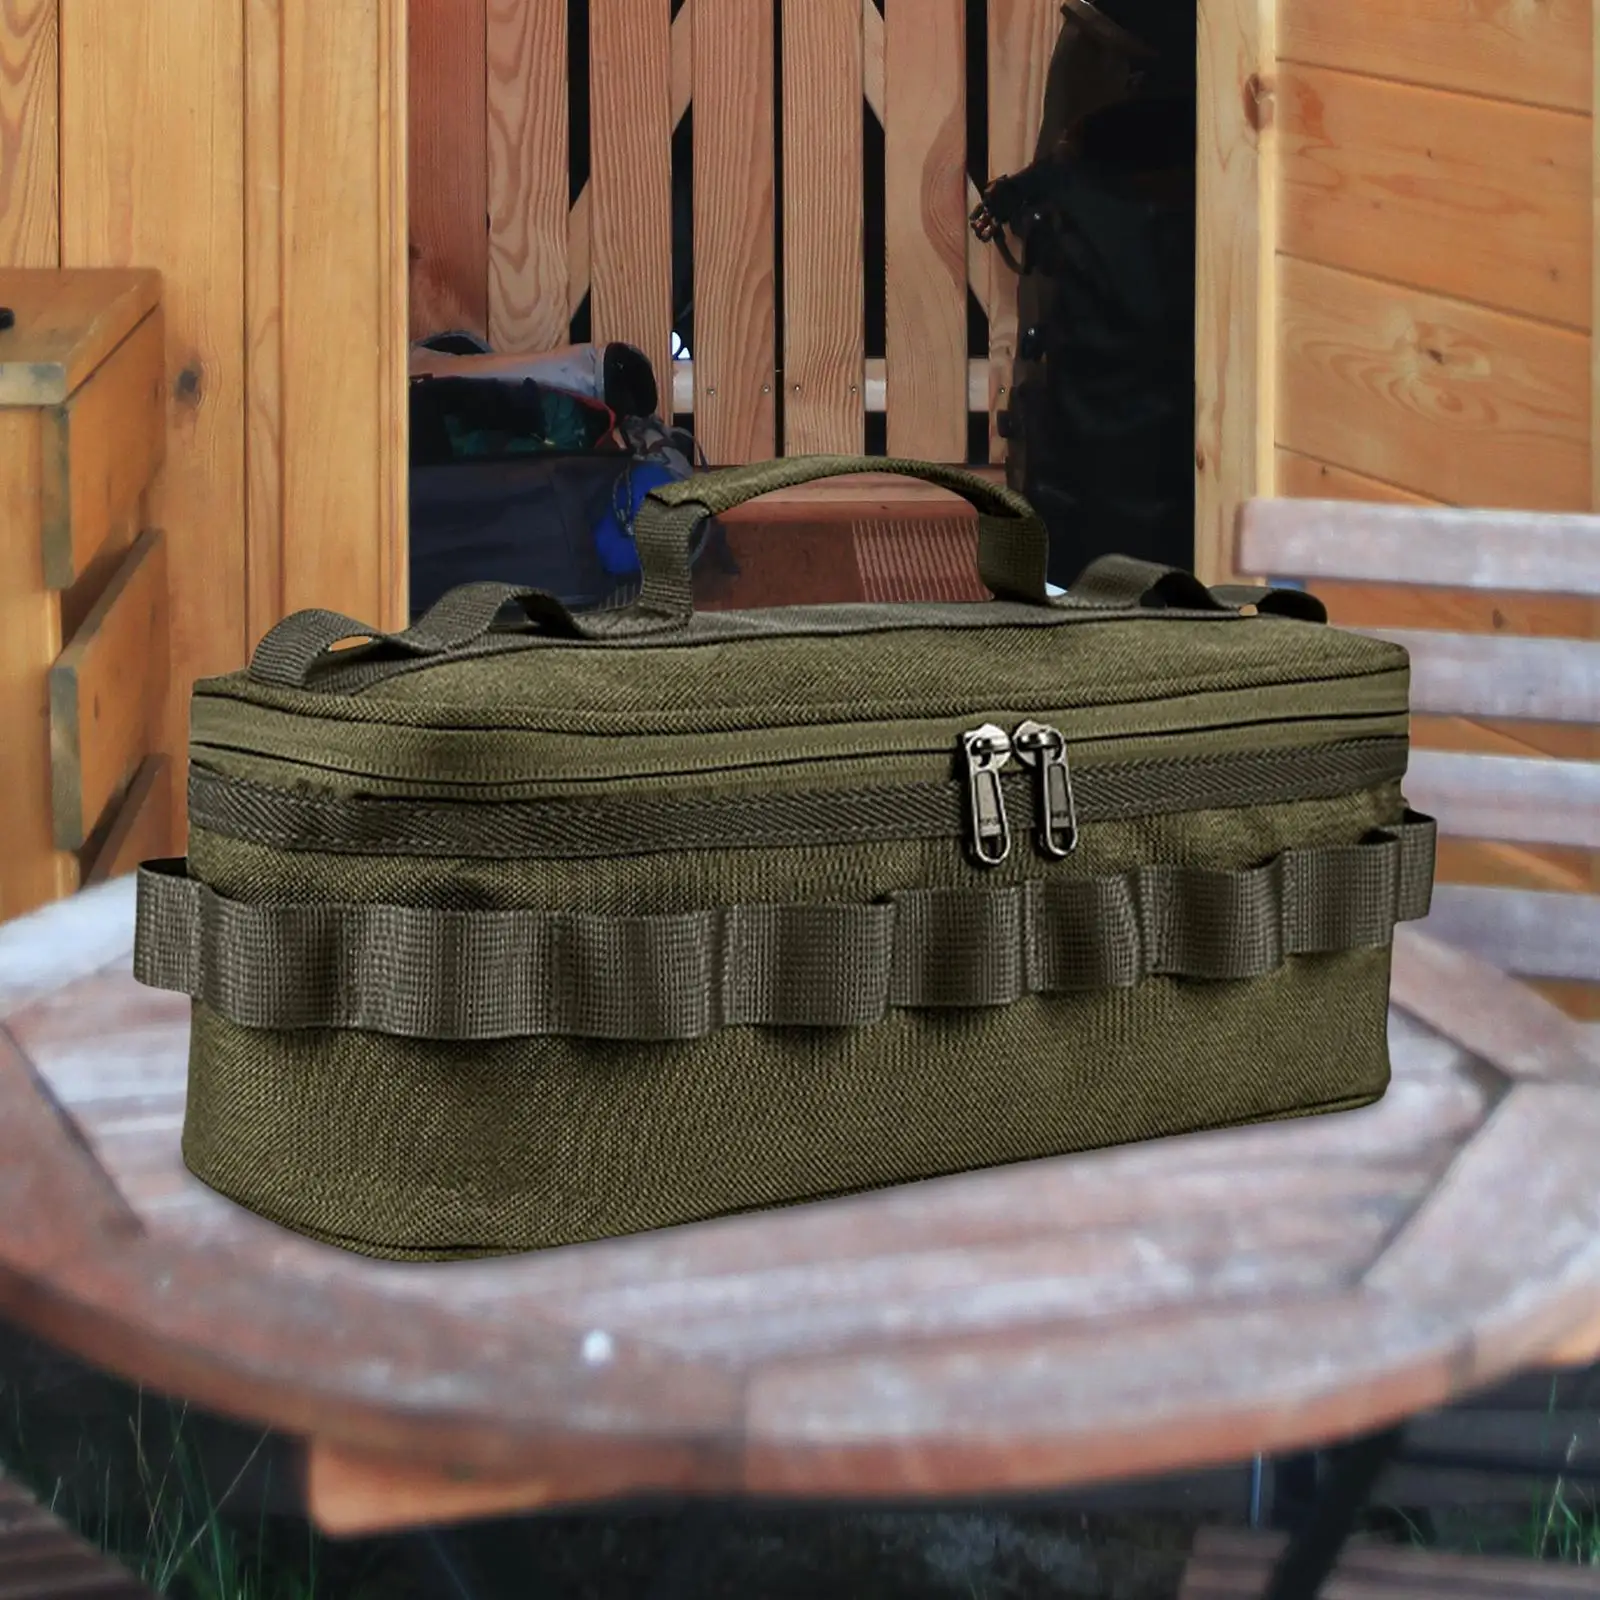 Camping Storage Bag Durable Waterproof Utility Tote Bag with Compartments for BBQ Picnic Travel Beach Outdoor Activities